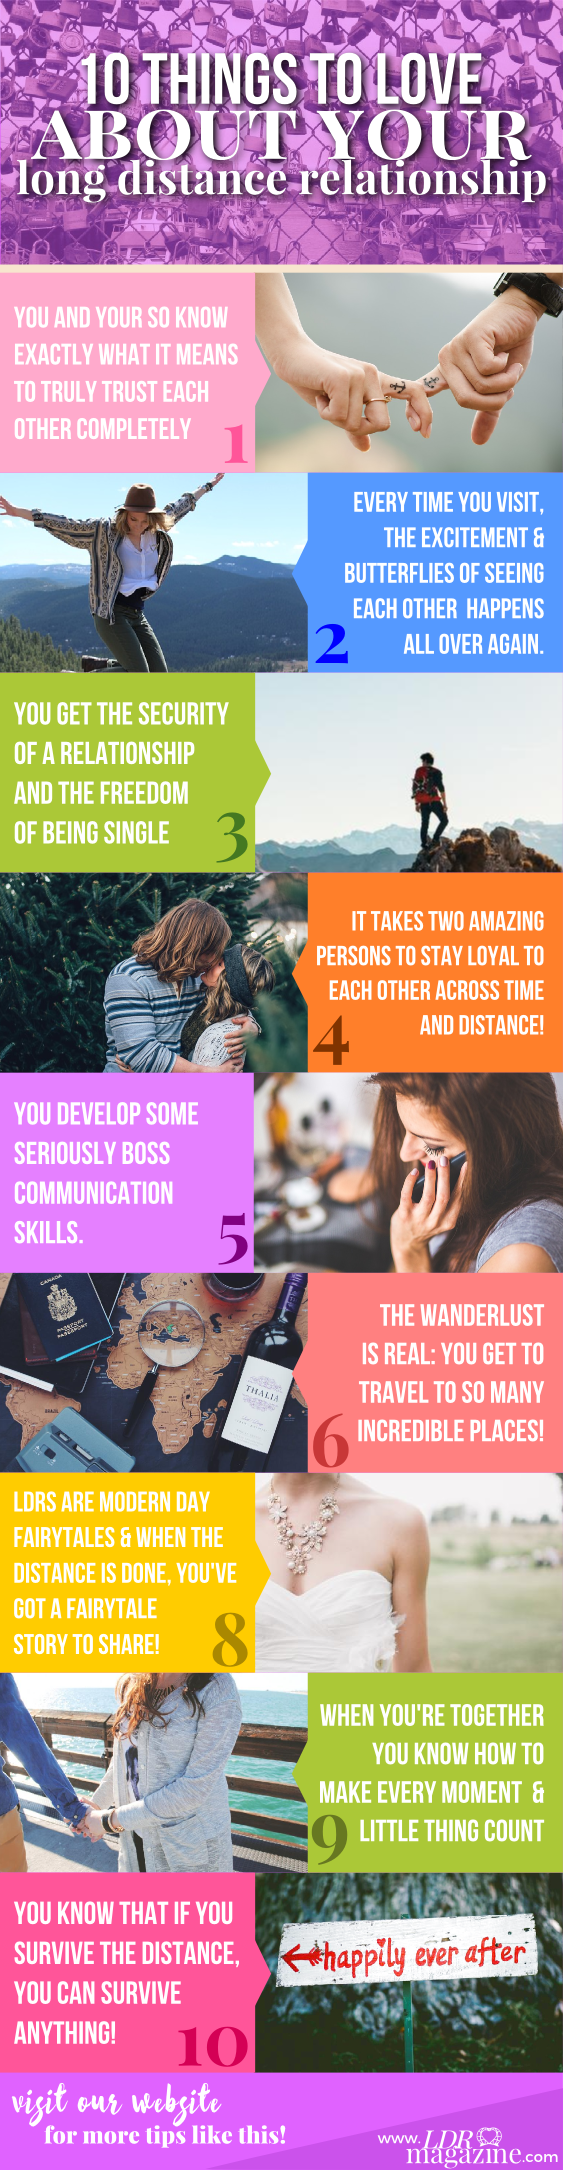 10 things to love about your LDR